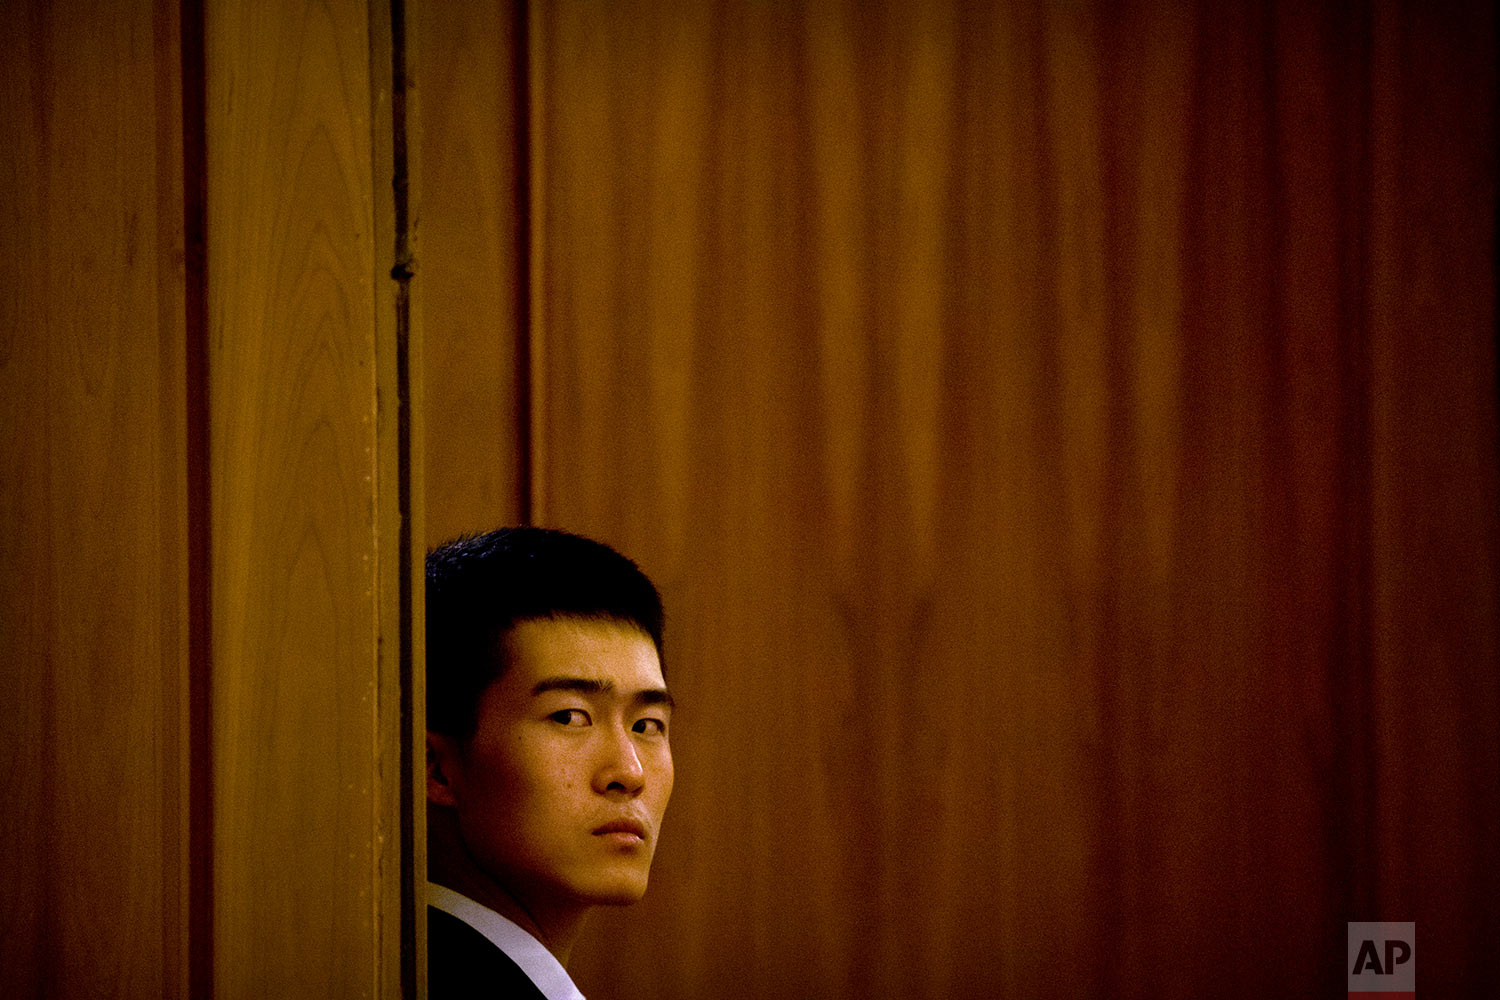  In this Friday, March 9, 2018 photo, a security official stands guard at a door during a plenary session of China's National People's Congress (NPC) at the Great Hall of the People in Beijing. (AP Photo/Mark Schiefelbein) 